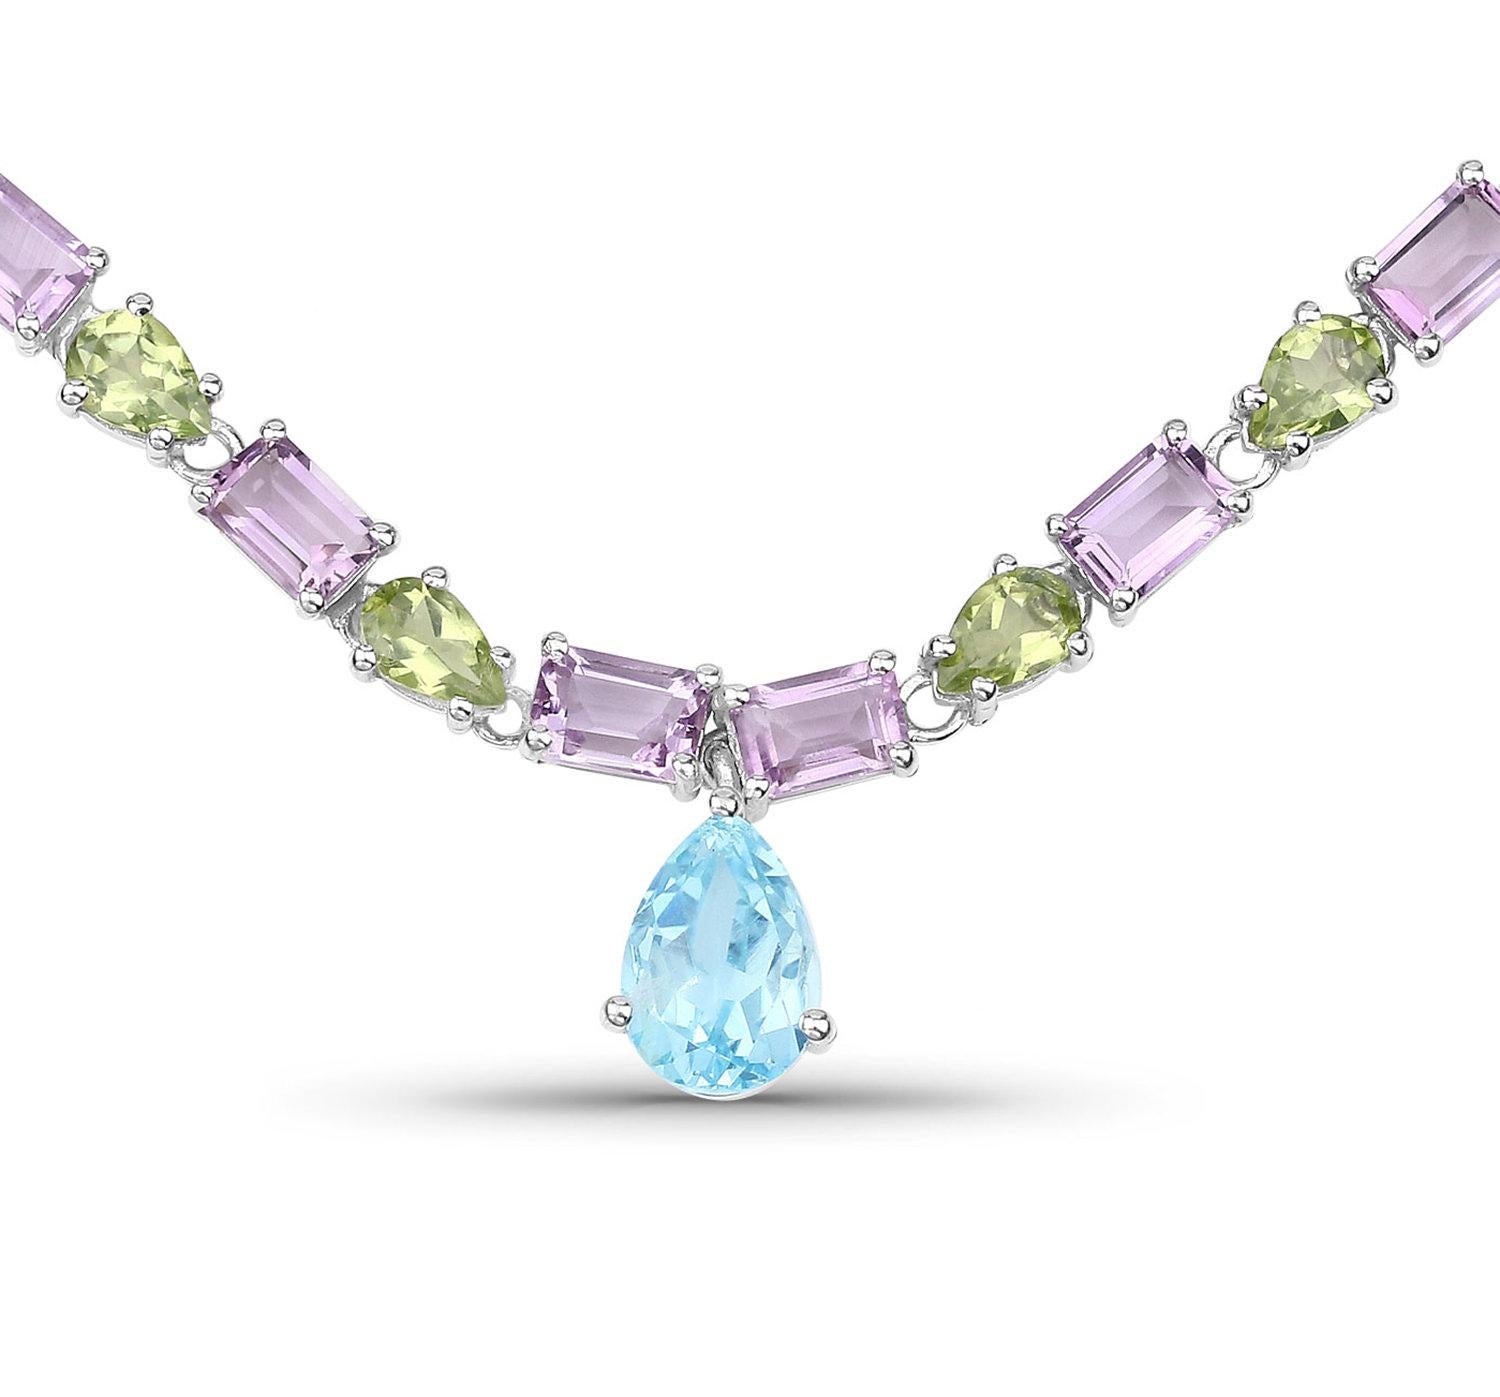 It comes with the appraisal by GIA GG/AJP
Blue Topaz = 1.90 Carat ( 10 x 7 mm )
Cut: Pear
Total Quantity of Topaz: 1
Amethyst = 17 Carats ( 6 x 4 mm )
Cut: Emerald
Total Quantity of Amethyst: 34
Peridot = 13.50 Carats ( 6 x 4 mm )
Cut: Pear
Total